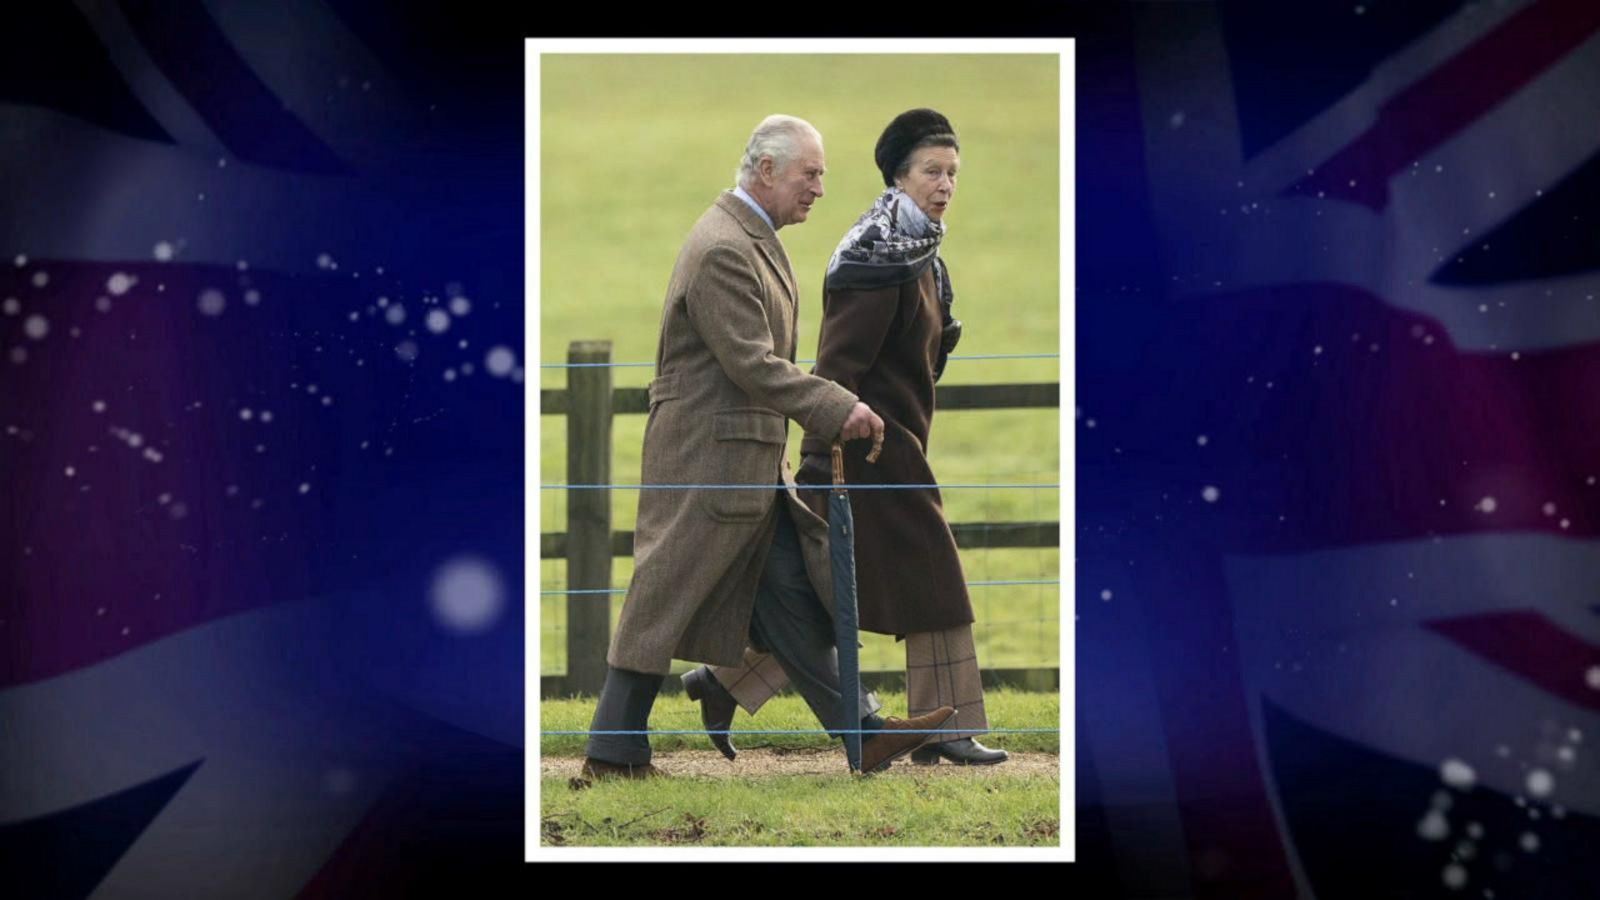 Princess Anne opens up about brother Charles ahead of coronation